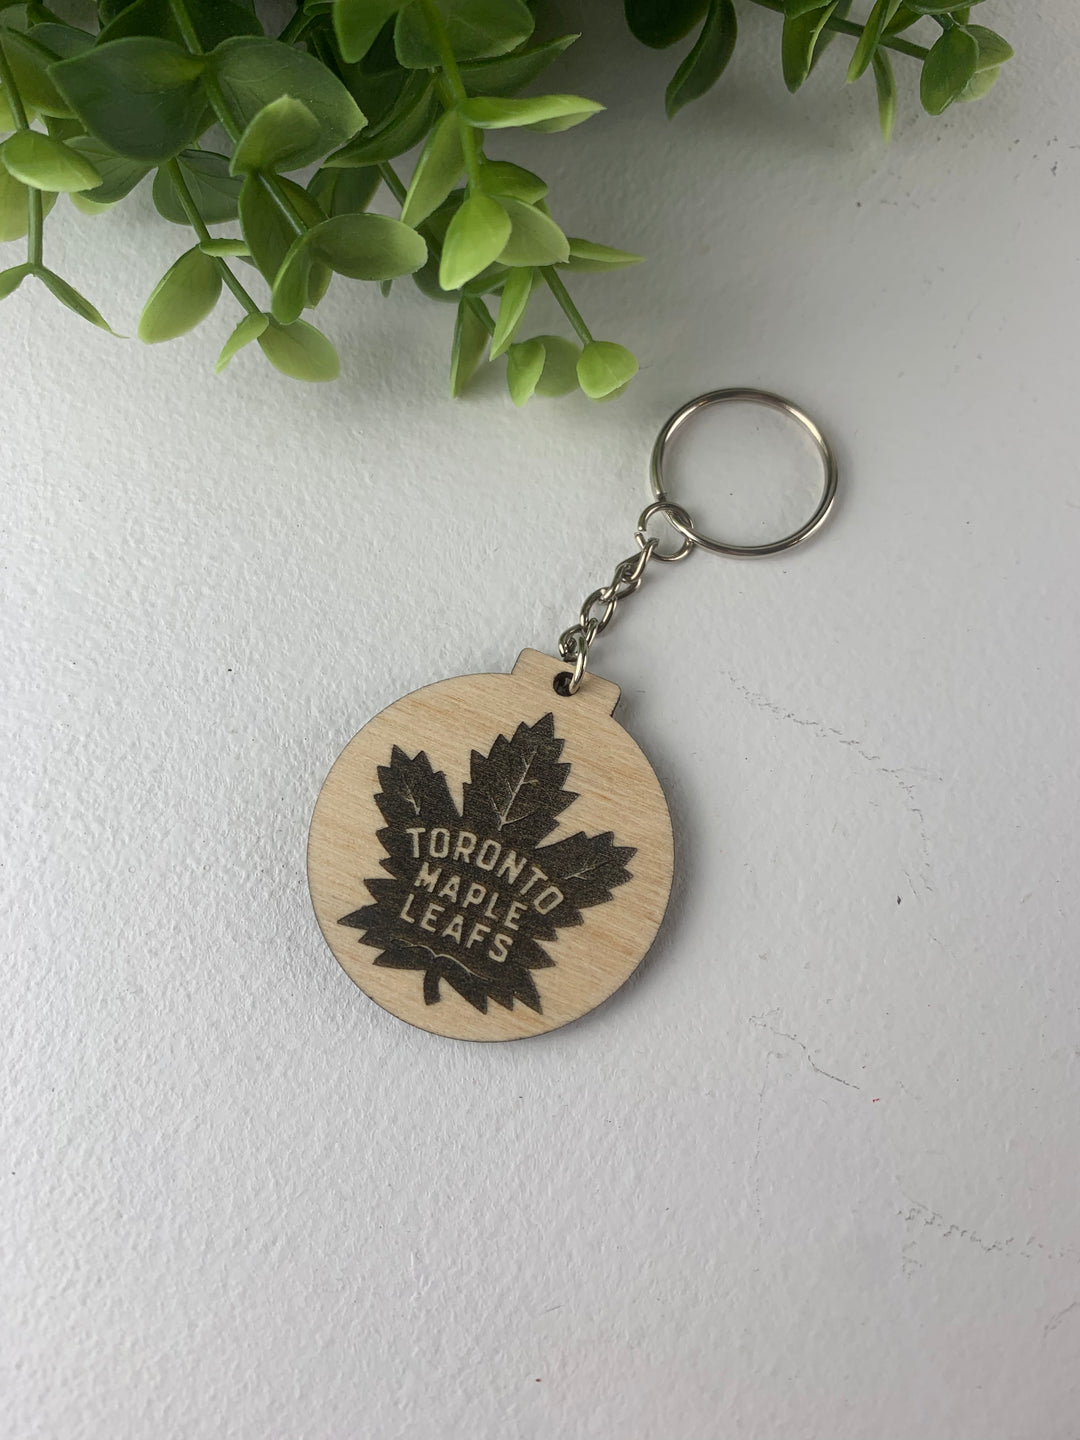 Rough Cut Dezigns, Engraved Wooden Keychains